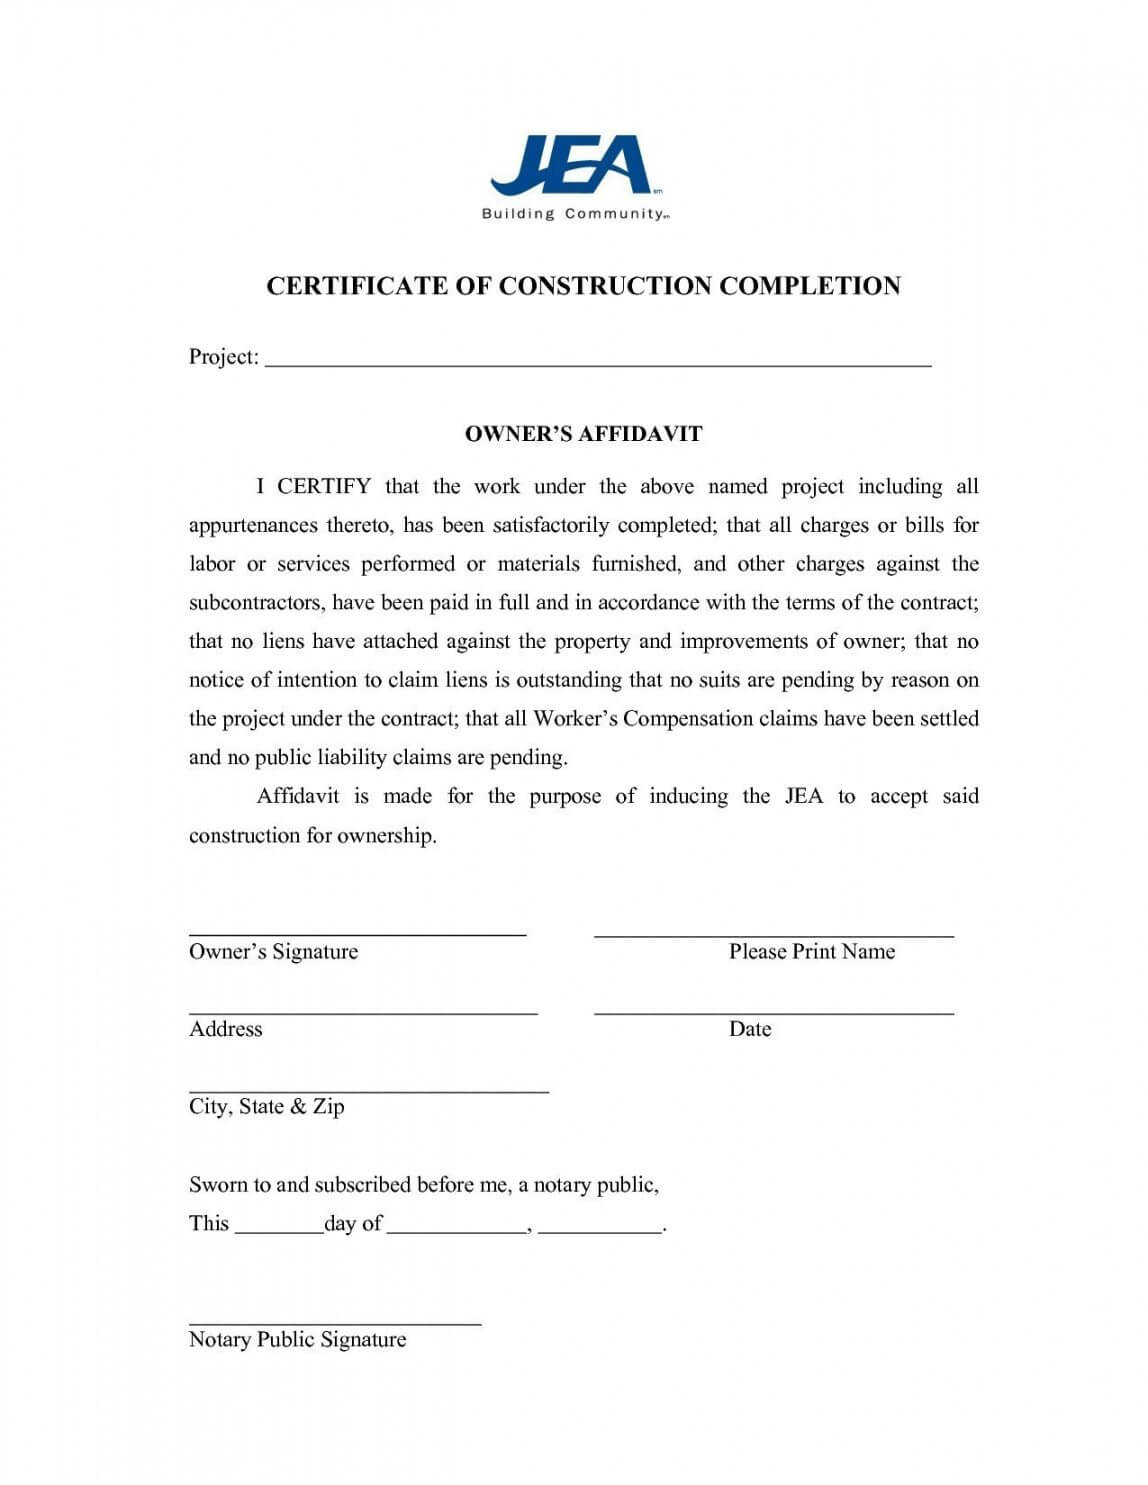 Free Project Completion Certificate Rmat In Word Template Pertaining To Construction Certificate Of Completion Template